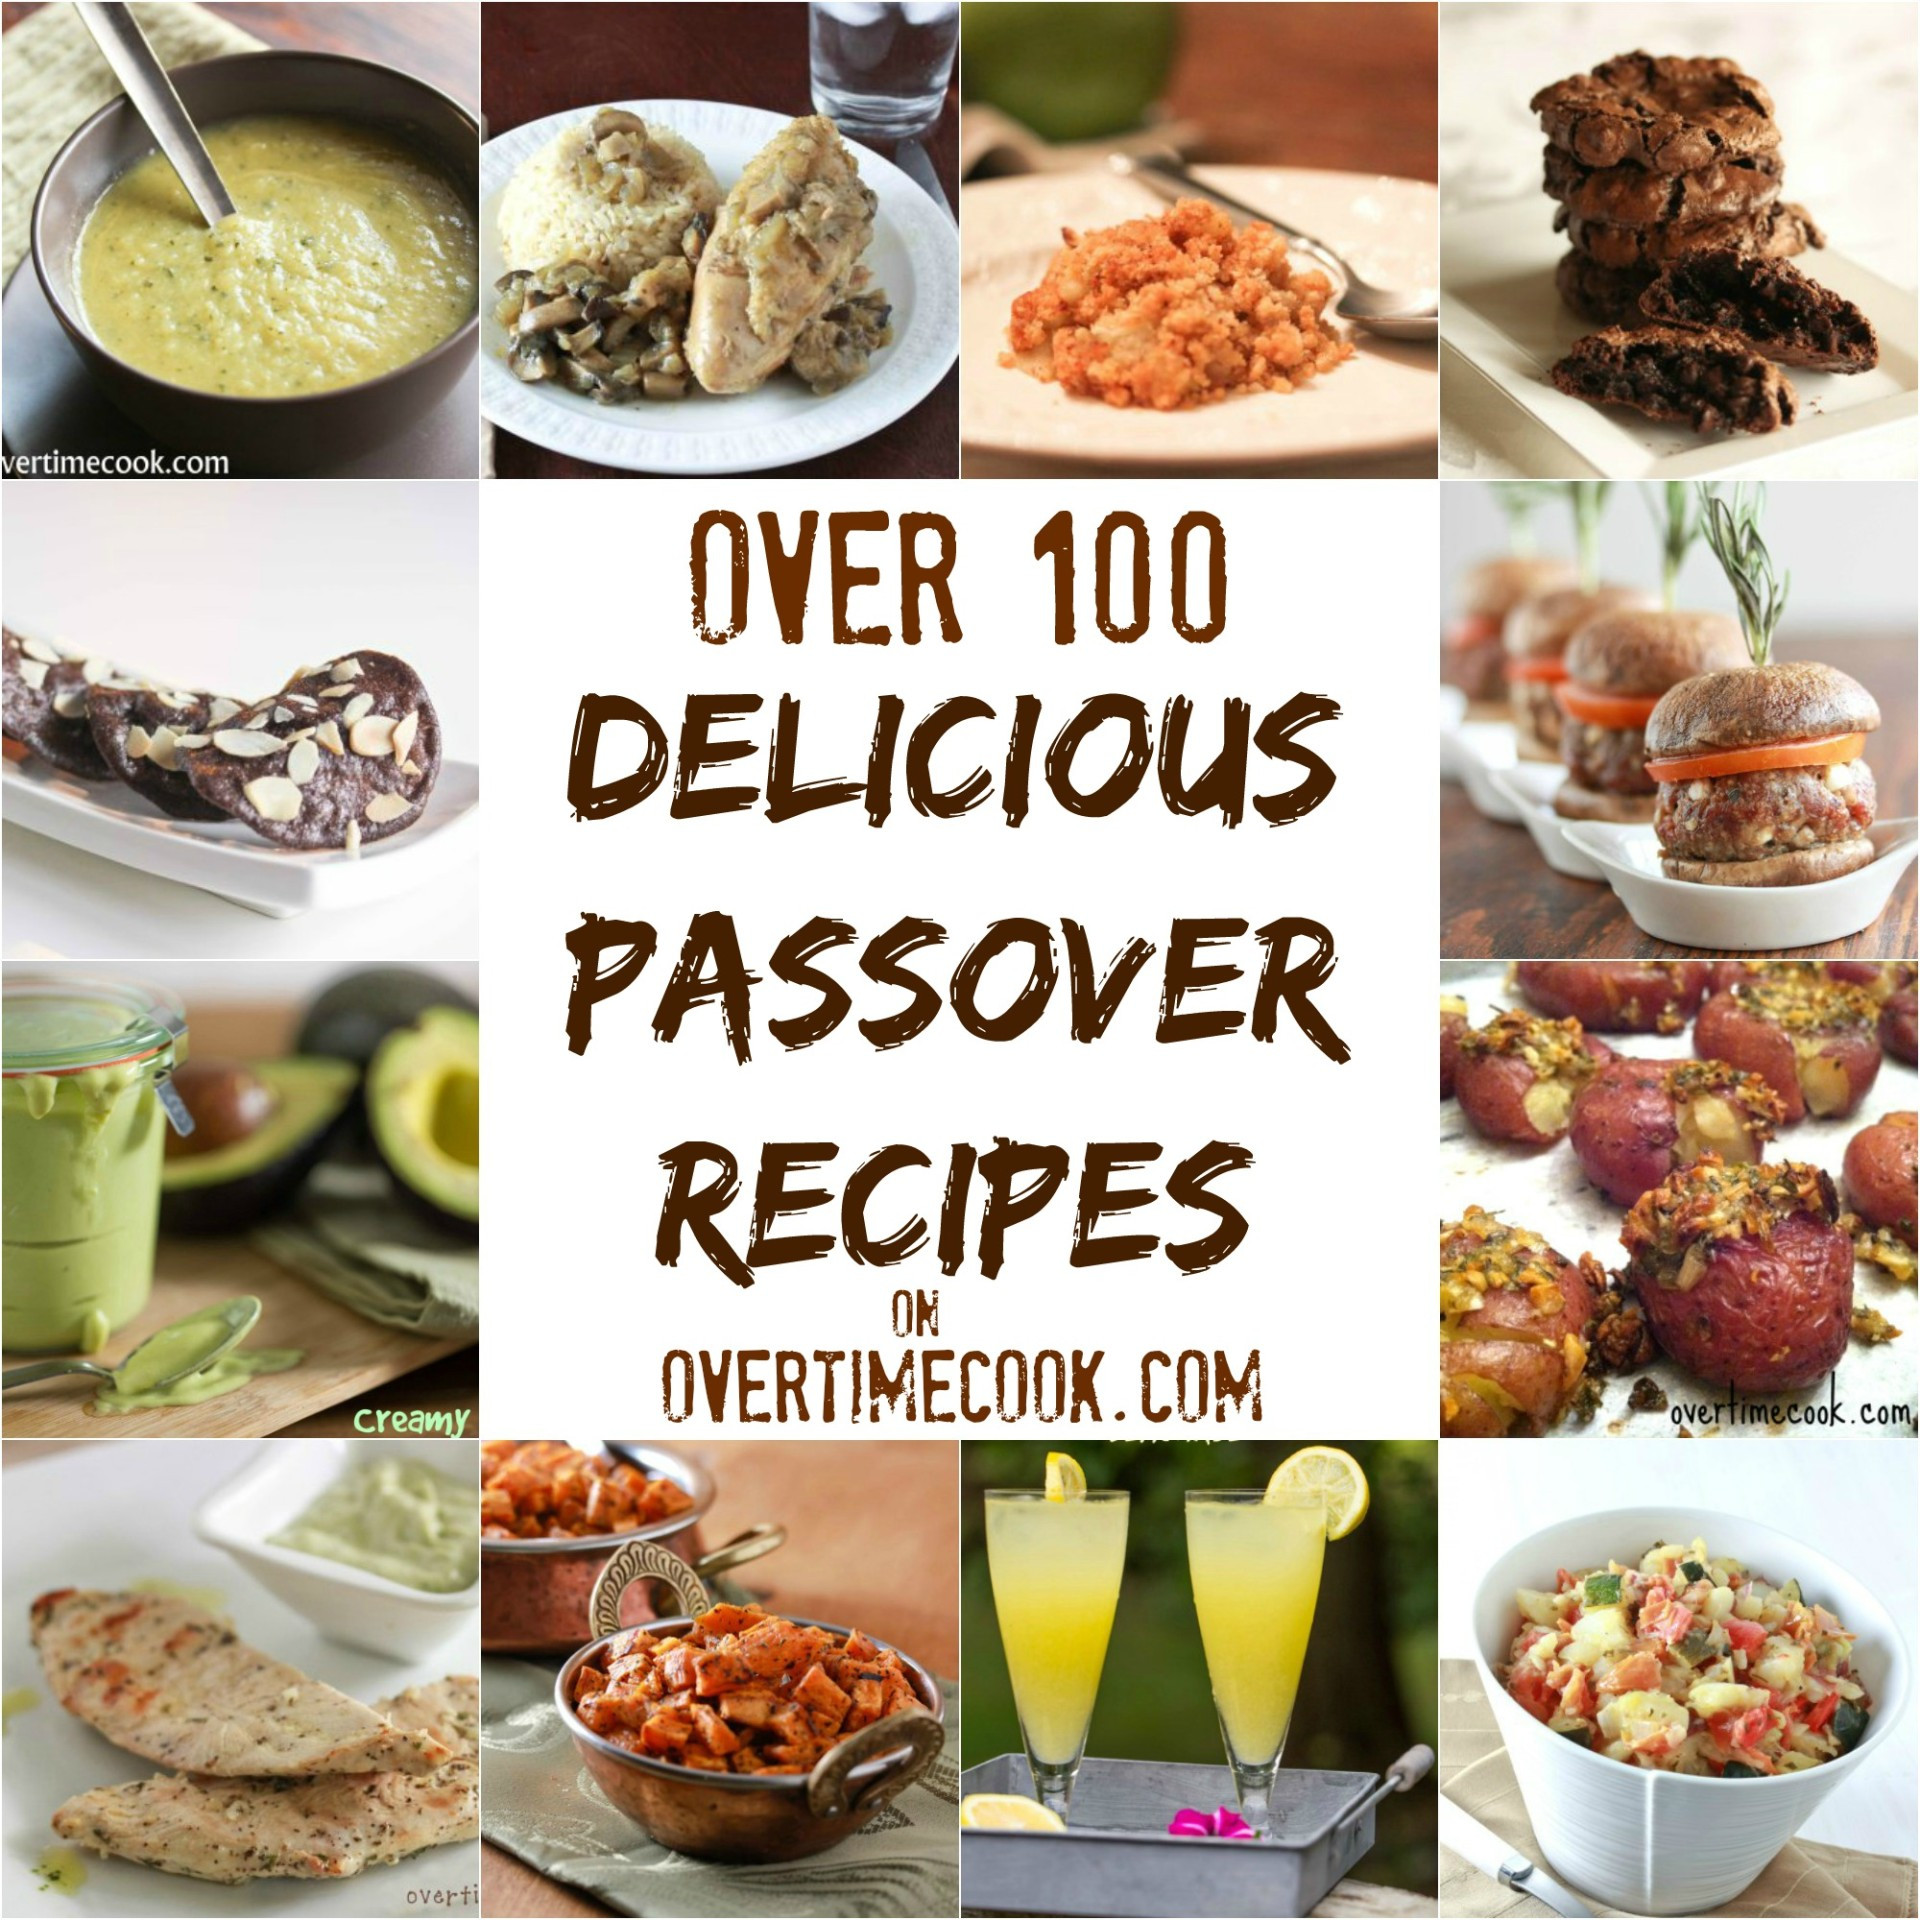 Passover Seder Food
 Over 100 Delicious Passover Recipes Overtime Cook